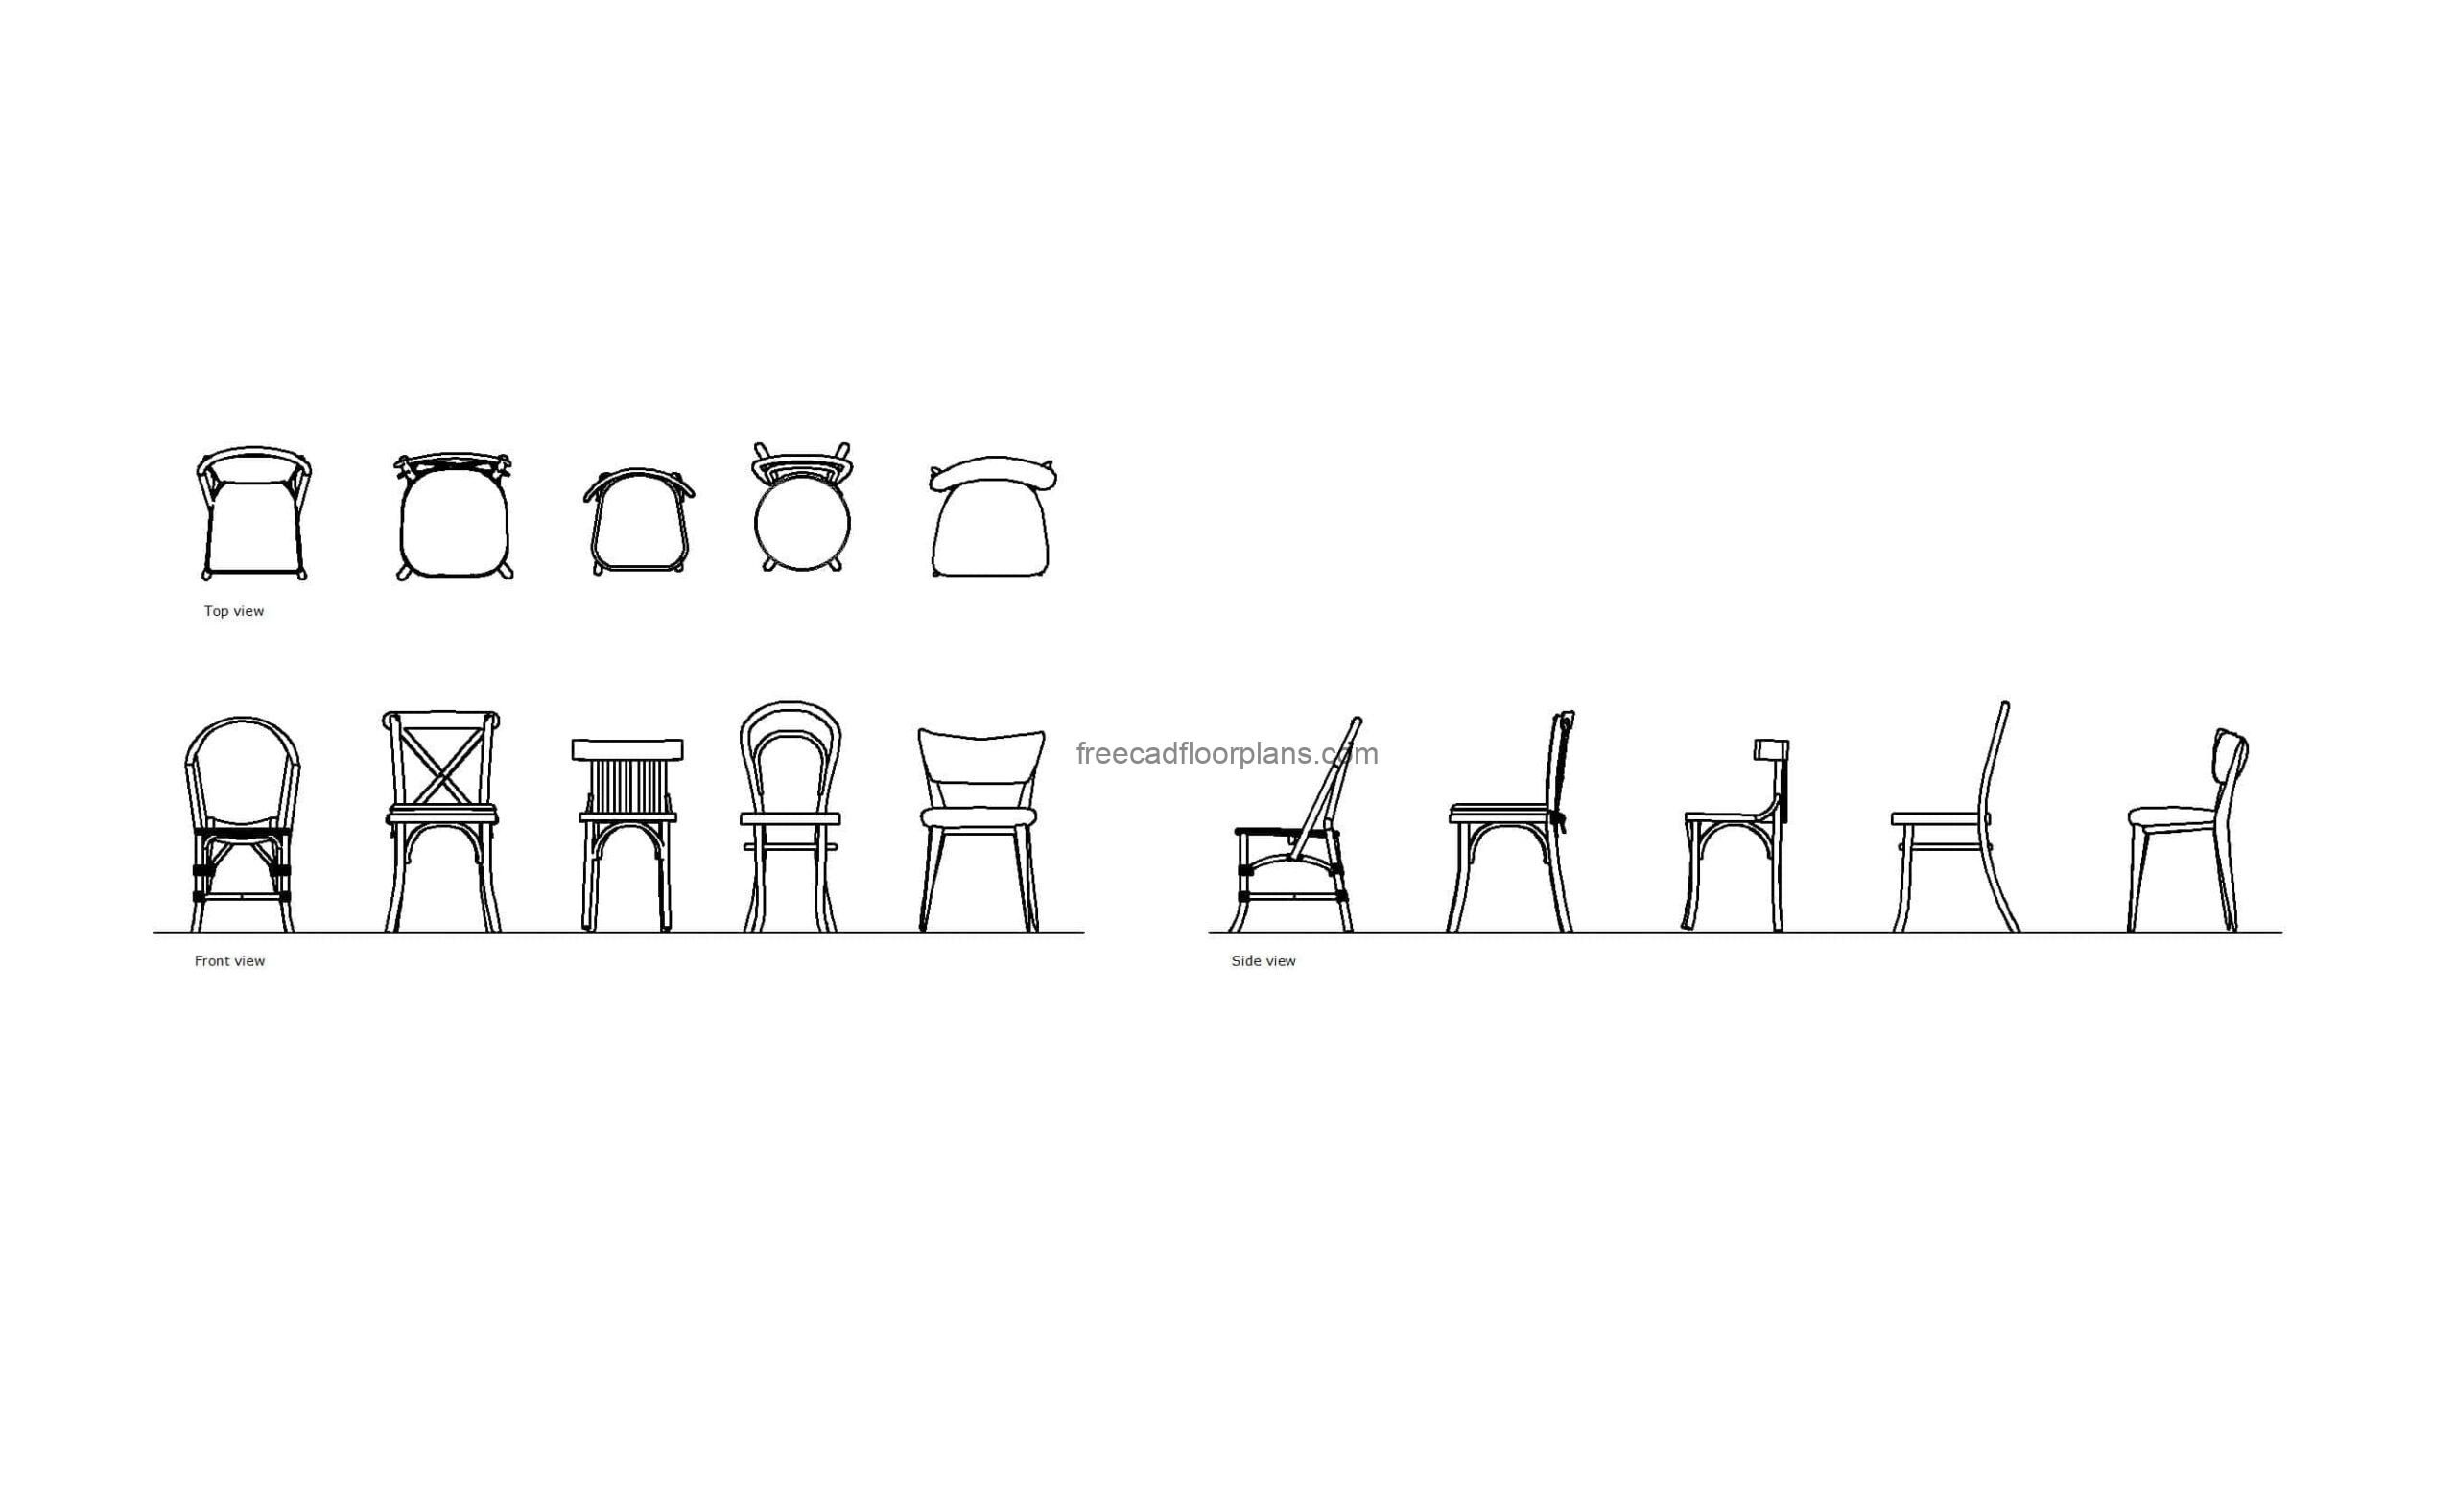 autocad drawing of bistro chairs, 2d views, plan and elevation, dwg file free for download